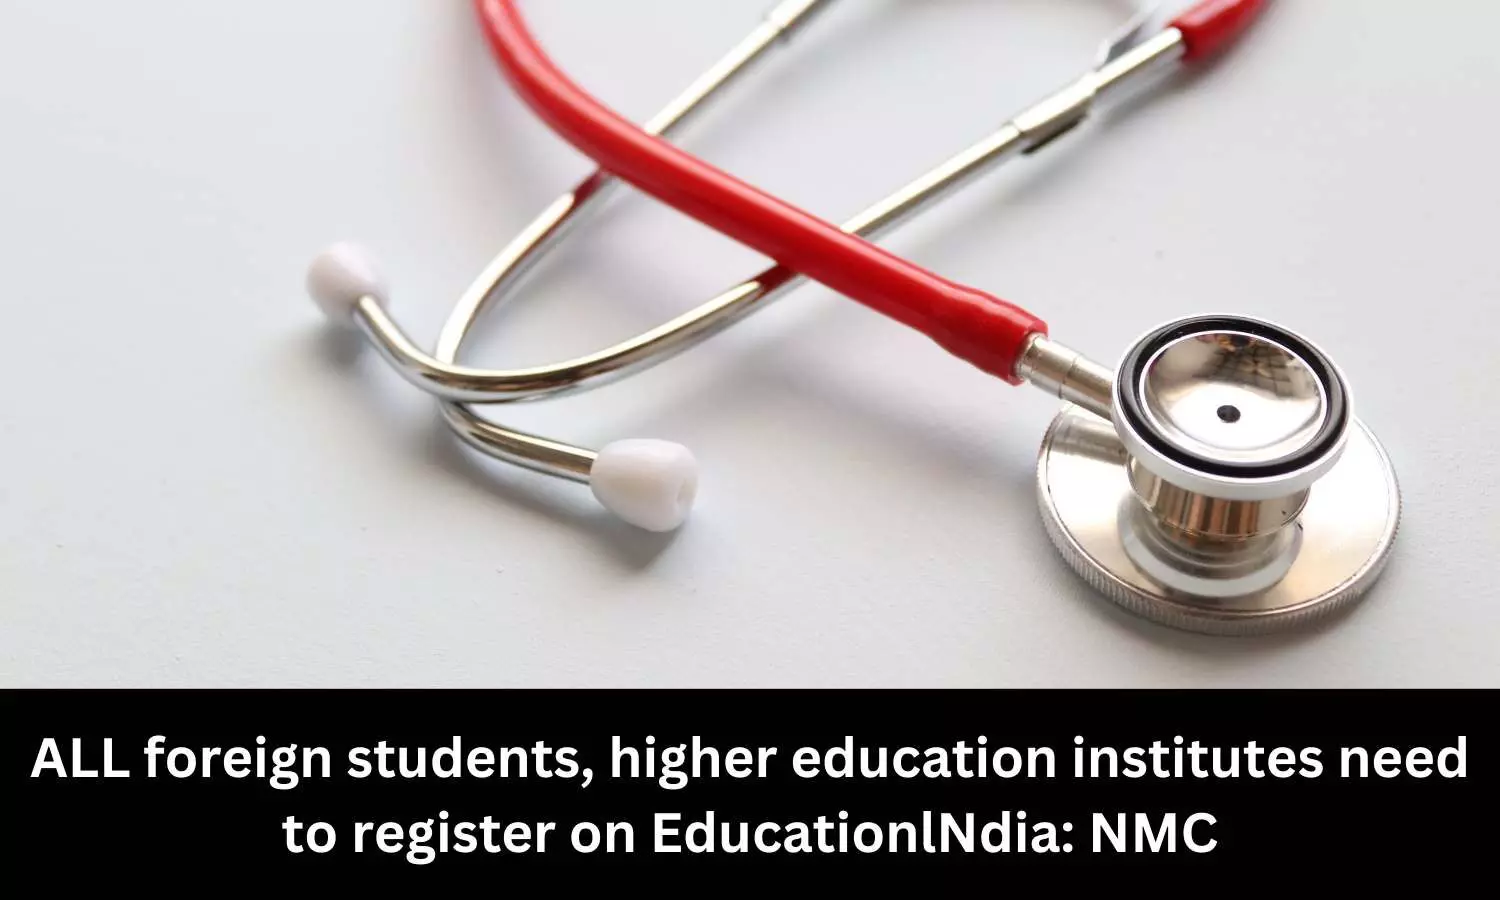 Higher education institutes, foreign students need to register on EducationINdia portal: NMC